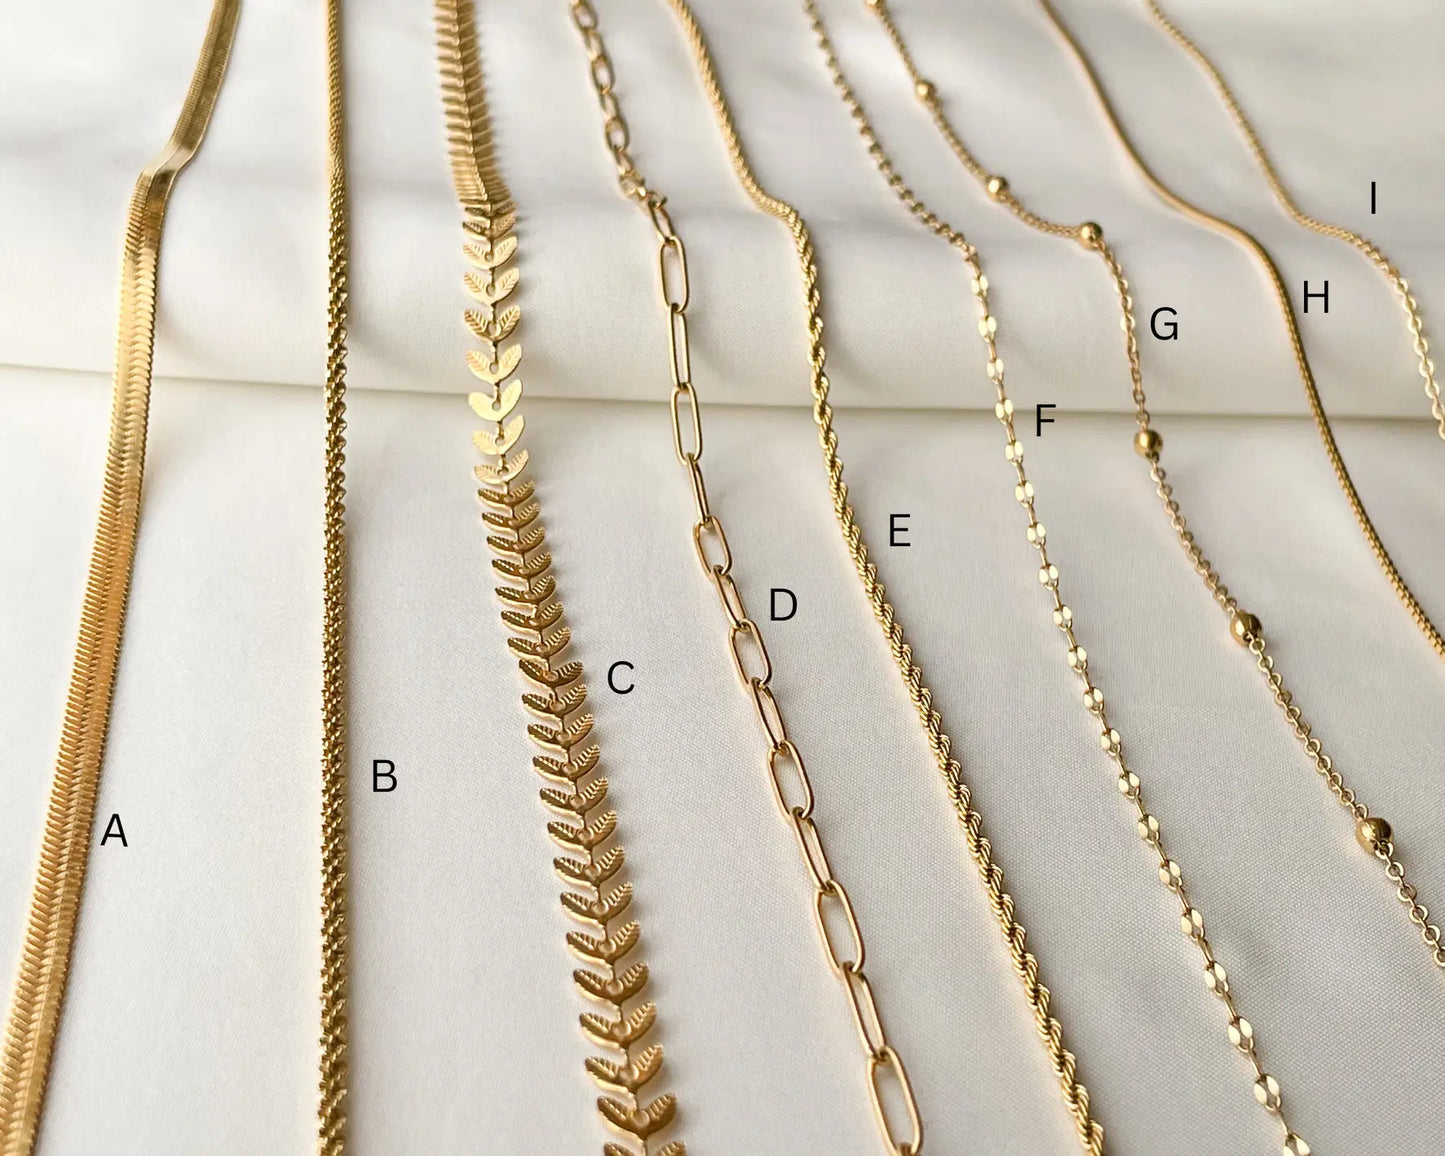 Cable (I) Dainty Gold Necklaces - 18k Gold Pvd Plated Chains